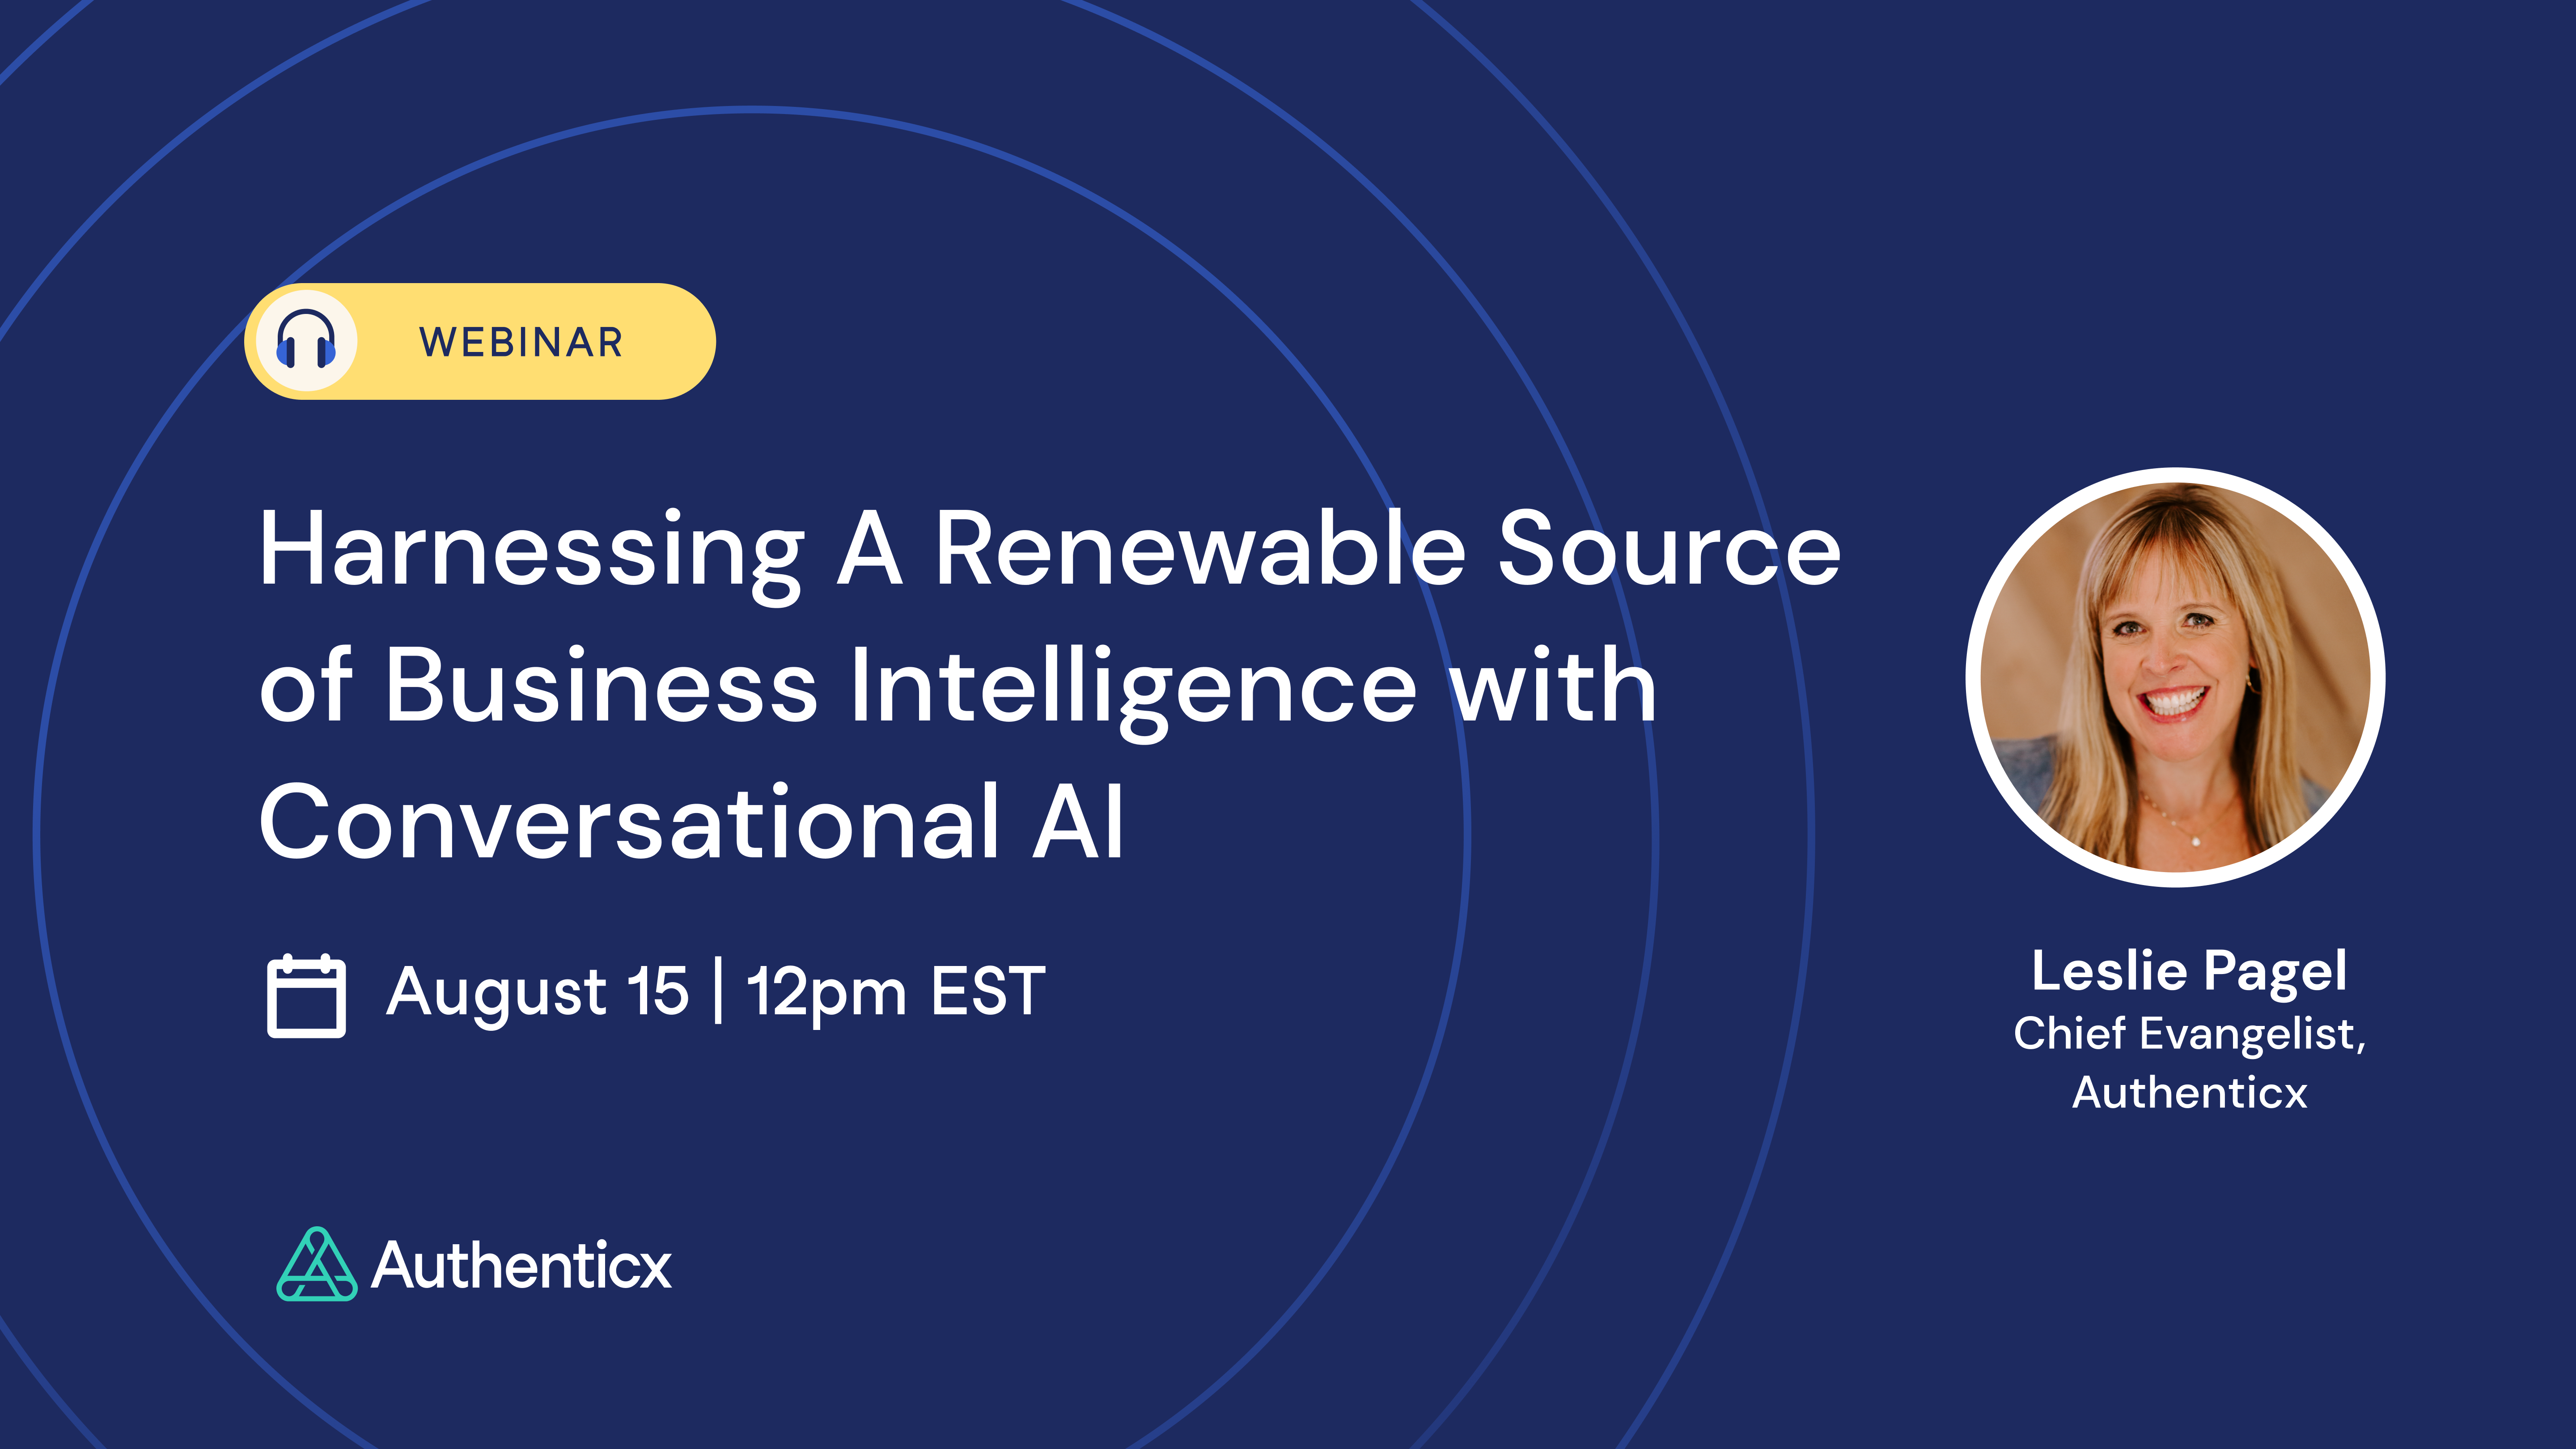 Webinar | Harnessing A Renewable Source of Business Intelligence with Conversational AI